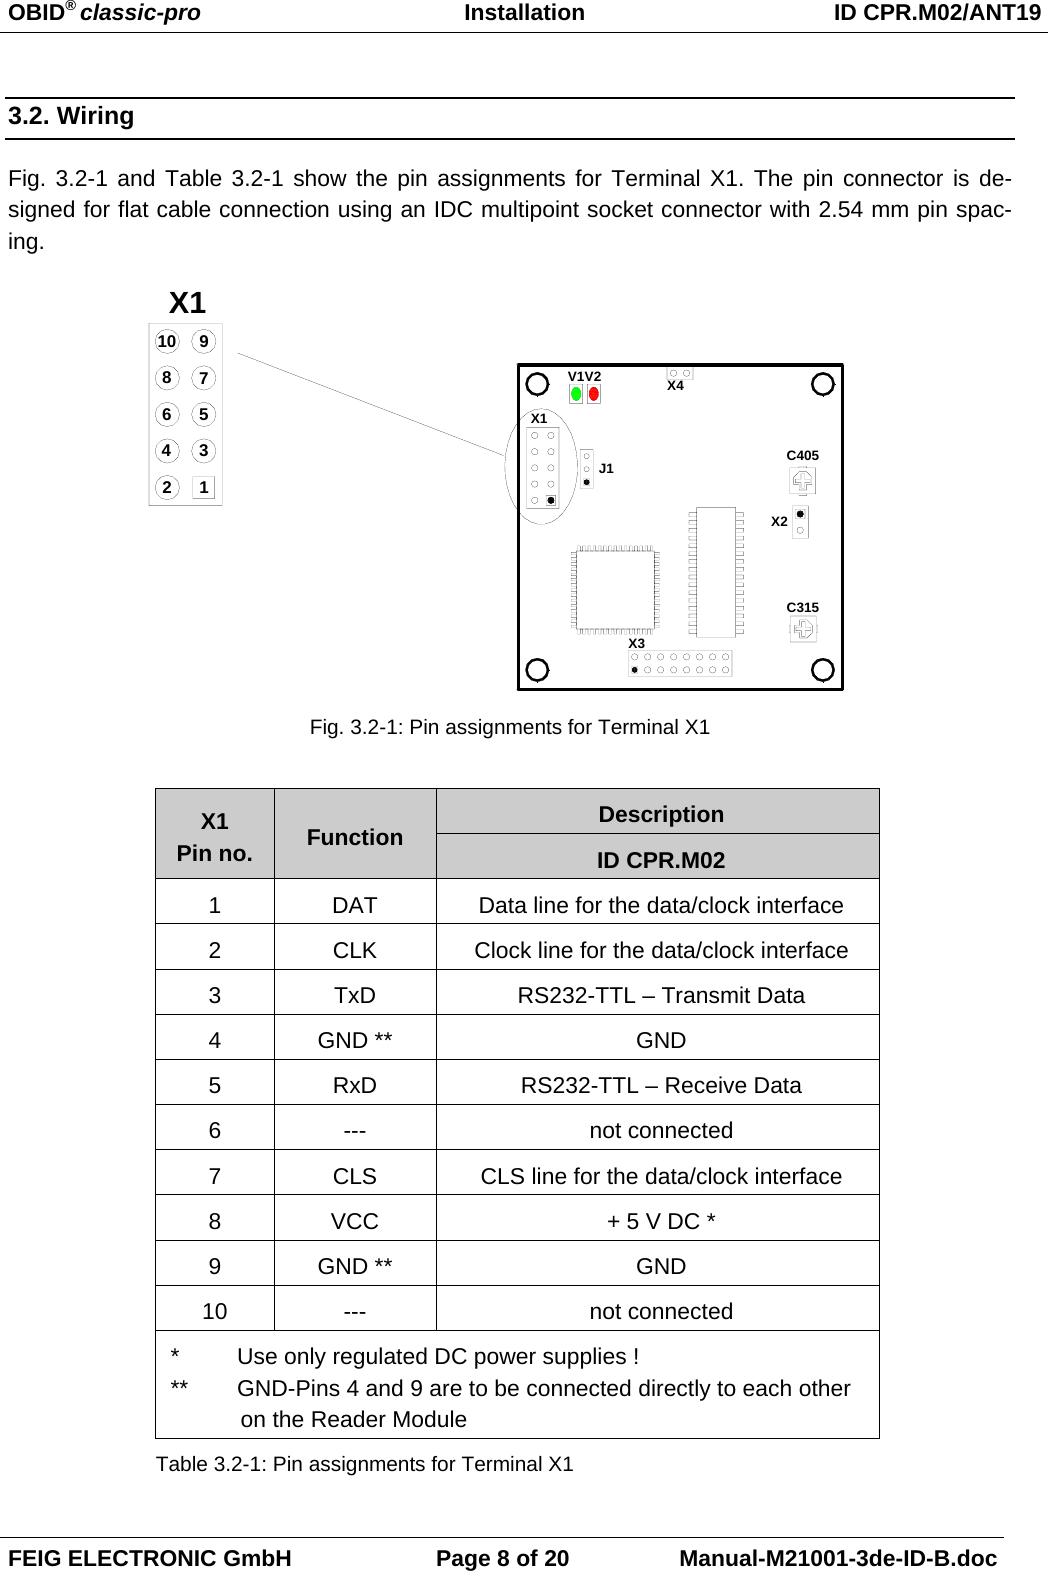 OBID® classic-pro Installation ID CPR.M02/ANT19FEIG ELECTRONIC GmbH Page 8 of 20 Manual-M21001-3de-ID-B.doc3.2. WiringFig. 3.2-1 and Table 3.2-1 show the pin assignments for Terminal X1. The pin connector is de-signed for flat cable connection using an IDC multipoint socket connector with 2.54 mm pin spac-ing.Fig. 3.2-1: Pin assignments for Terminal X1DescriptionX1Pin no. Function ID CPR.M021DAT Data line for the data/clock interface2CLK Clock line for the data/clock interface3TxD RS232-TTL – Transmit Data4GND ** GND5RxD RS232-TTL – Receive Data6--- not connected7CLS CLS line for the data/clock interface8VCC + 5 V DC *9GND ** GND10 --- not connected*  Use only regulated DC power supplies !**  GND-Pins 4 and 9 are to be connected directly to each other           on the Reader ModuleTable 3.2-1: Pin assignments for Terminal X1X1J1V2V1C315X112435796810X3X4C405X2